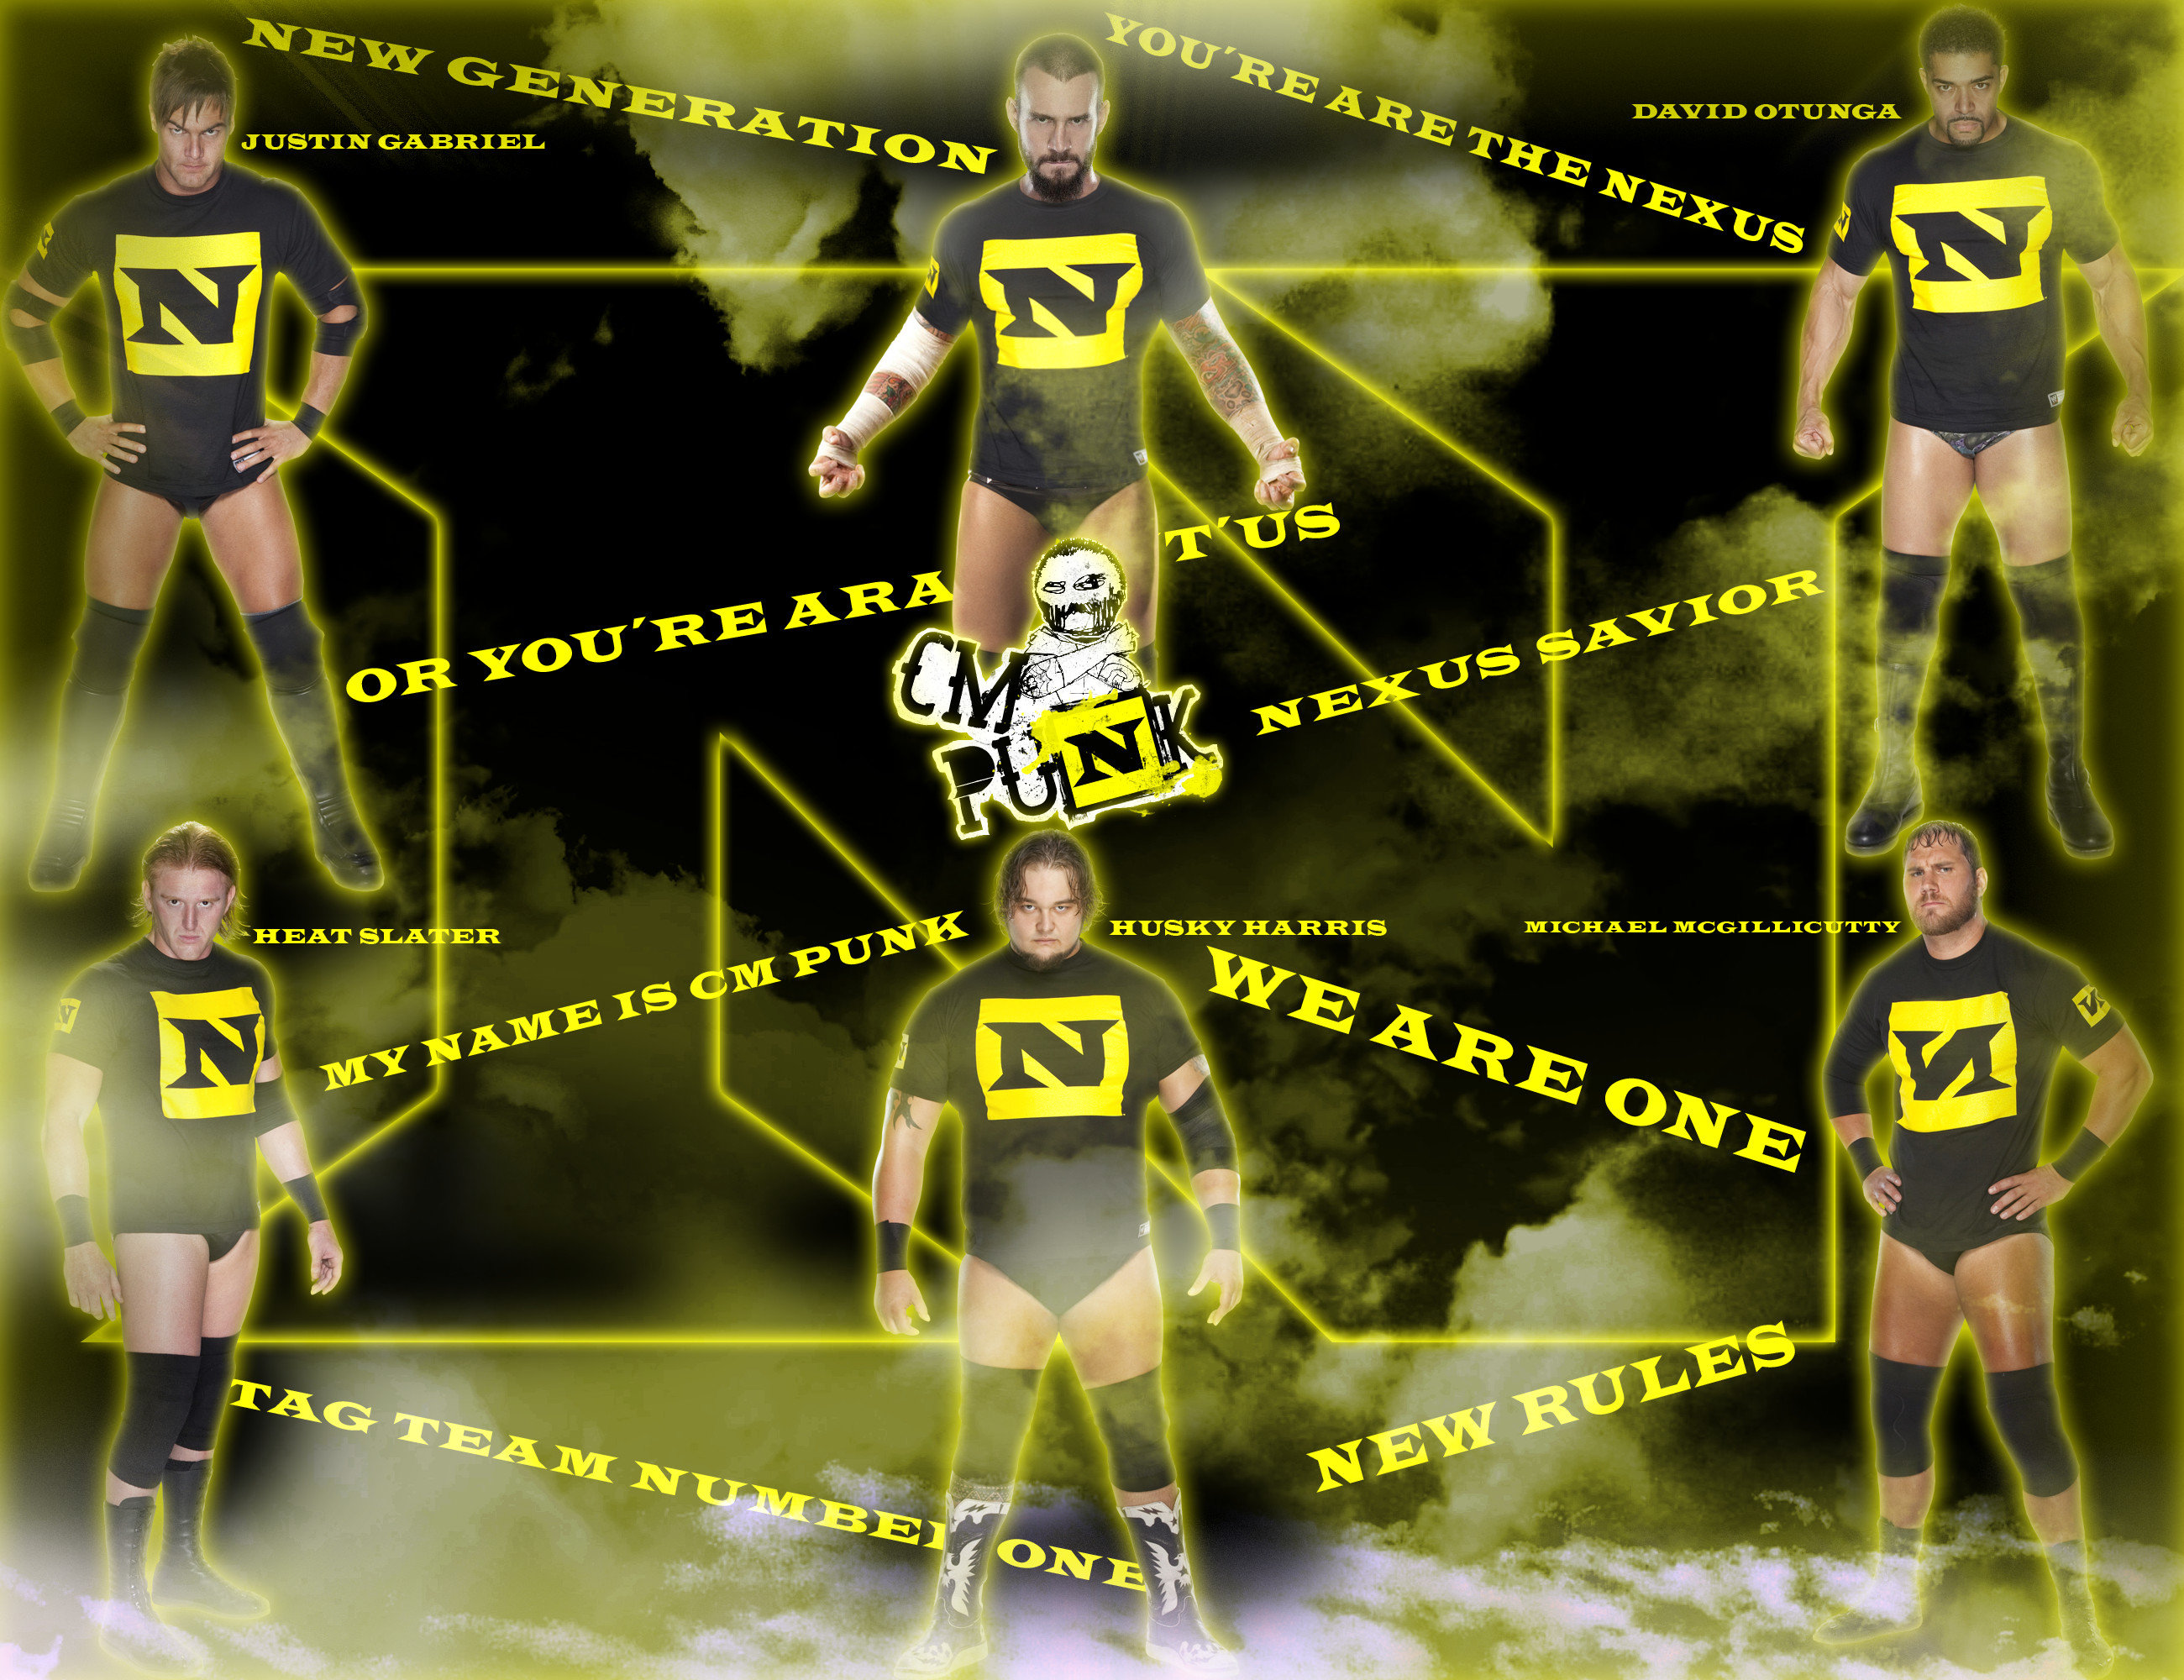 … DecadeofSmackdownV3 Cm Punk new leader The nexus by DecadeofSmackdownV3